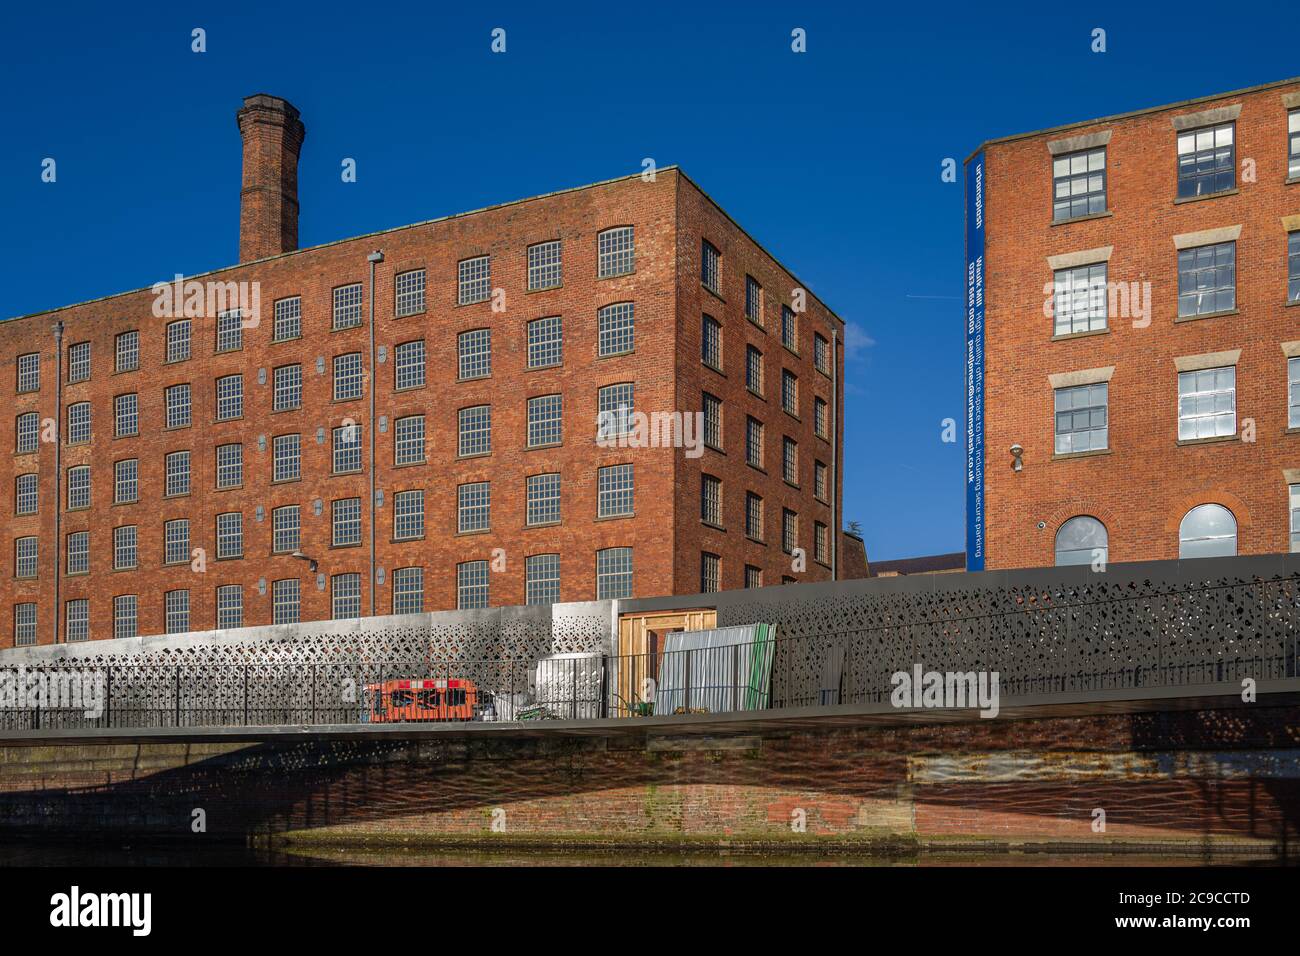 Murrays' Mills to the left. Shows iconic red brick, vast windows and mill chimney in building begun in 1797. Now apartments. Stock Photo